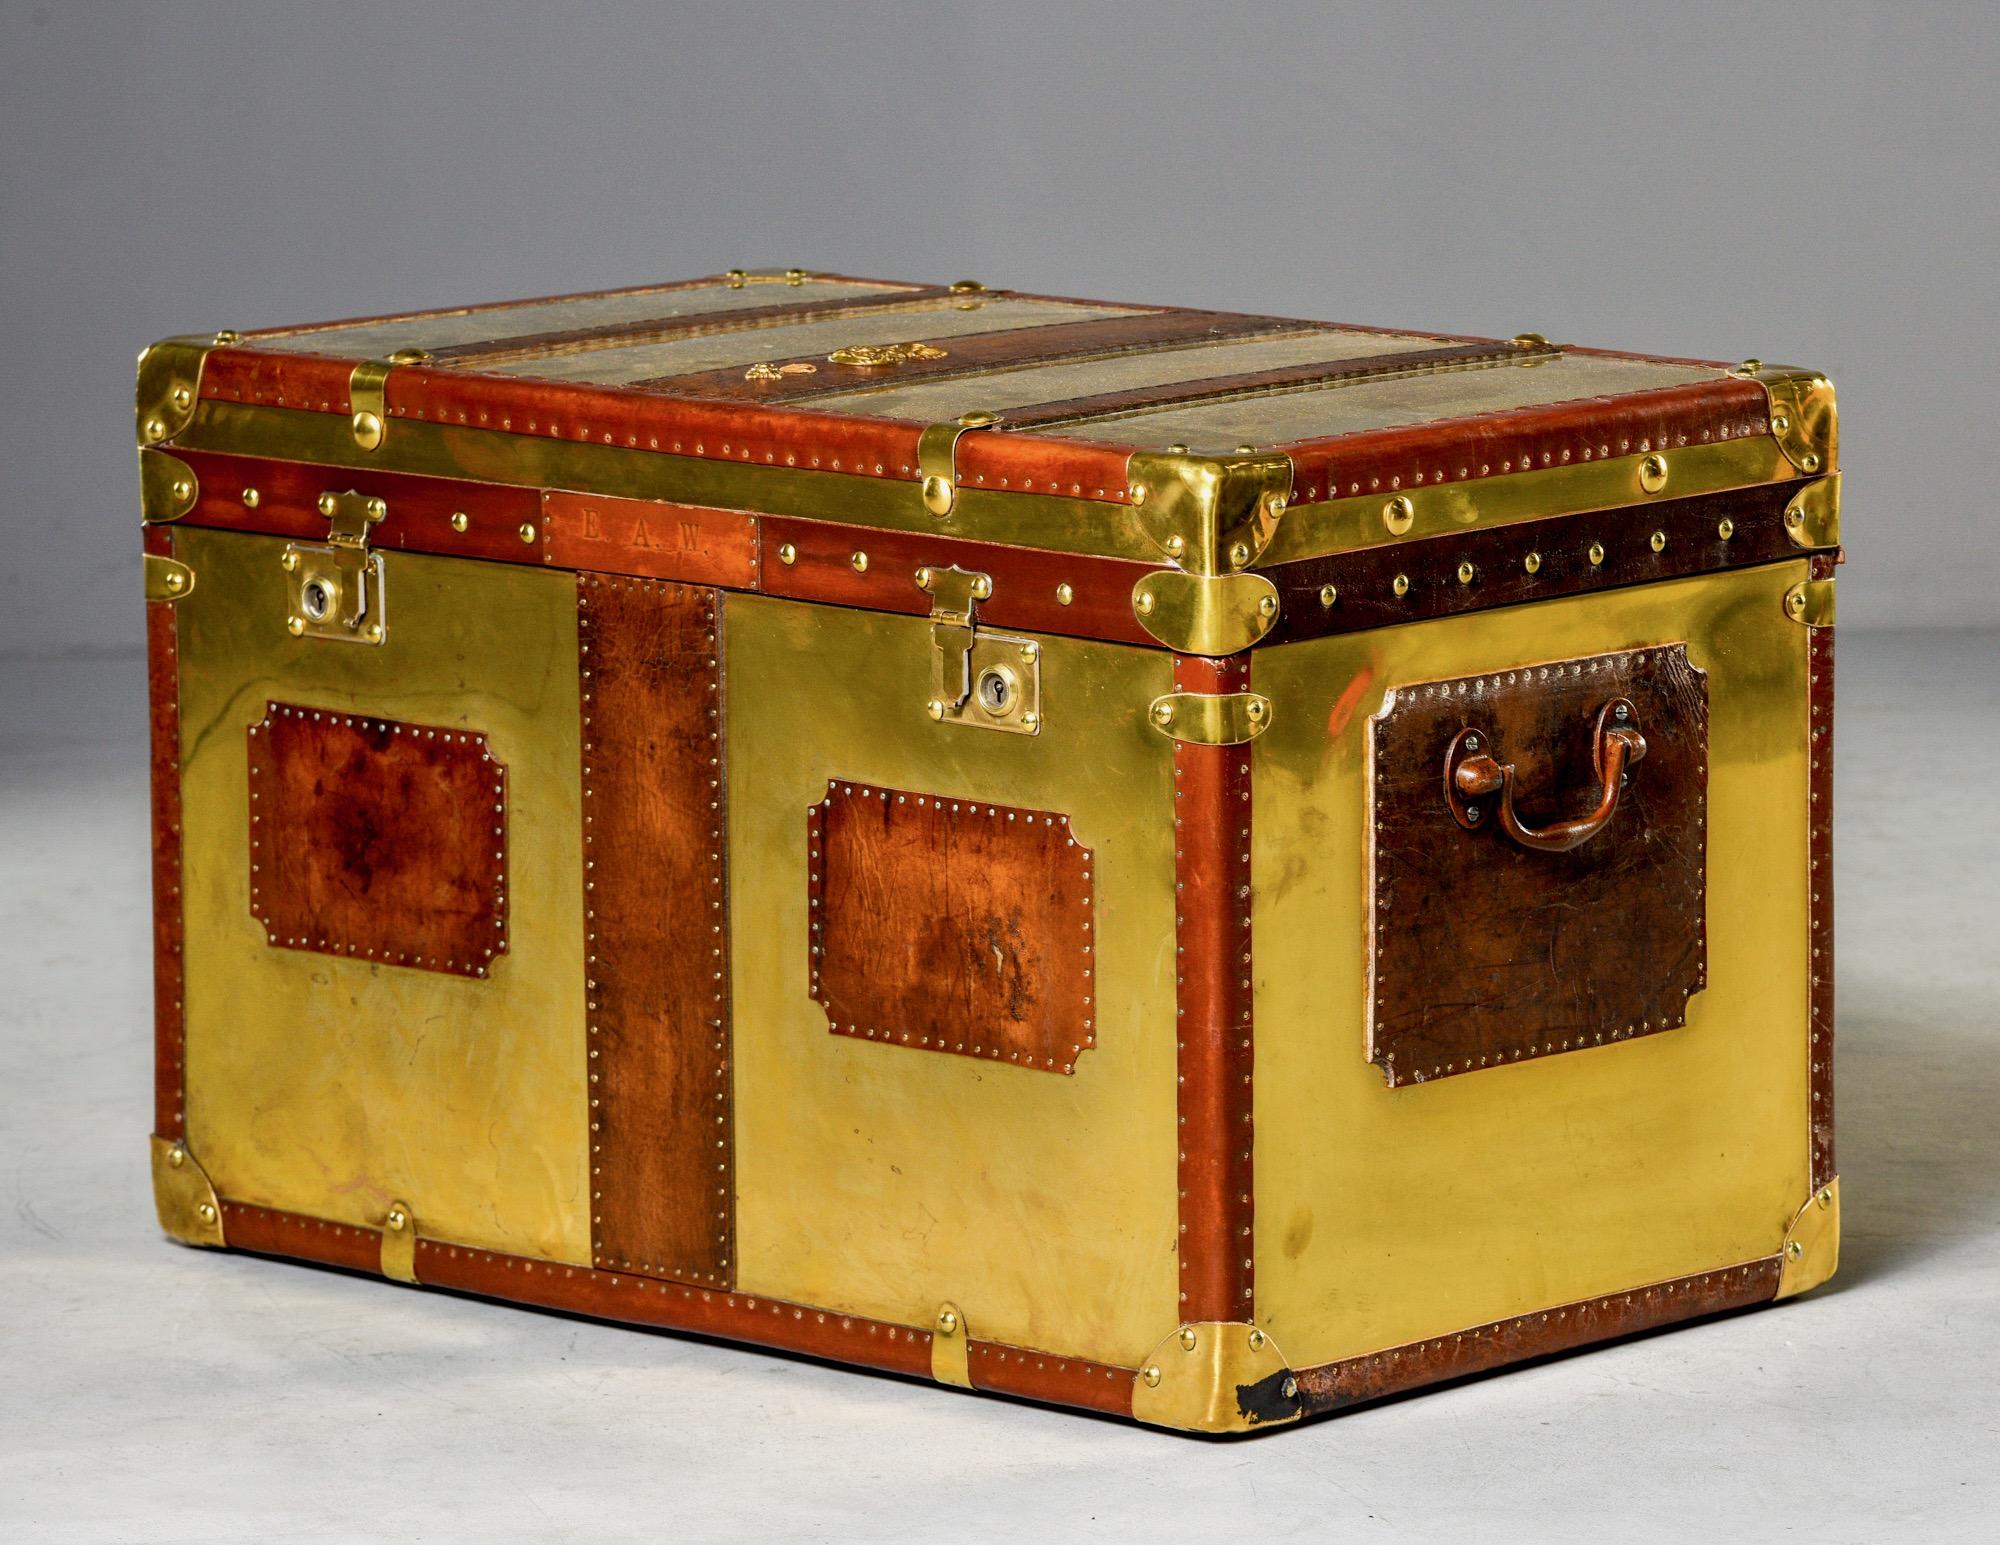 English brass and leather trunk with hinged lid circa 1930s. Wooden trunk is covered in weathered leather and polished brass and English grenadier’s ornamental details. New royal blue fabric lining and restored leather interior. Unknown maker.